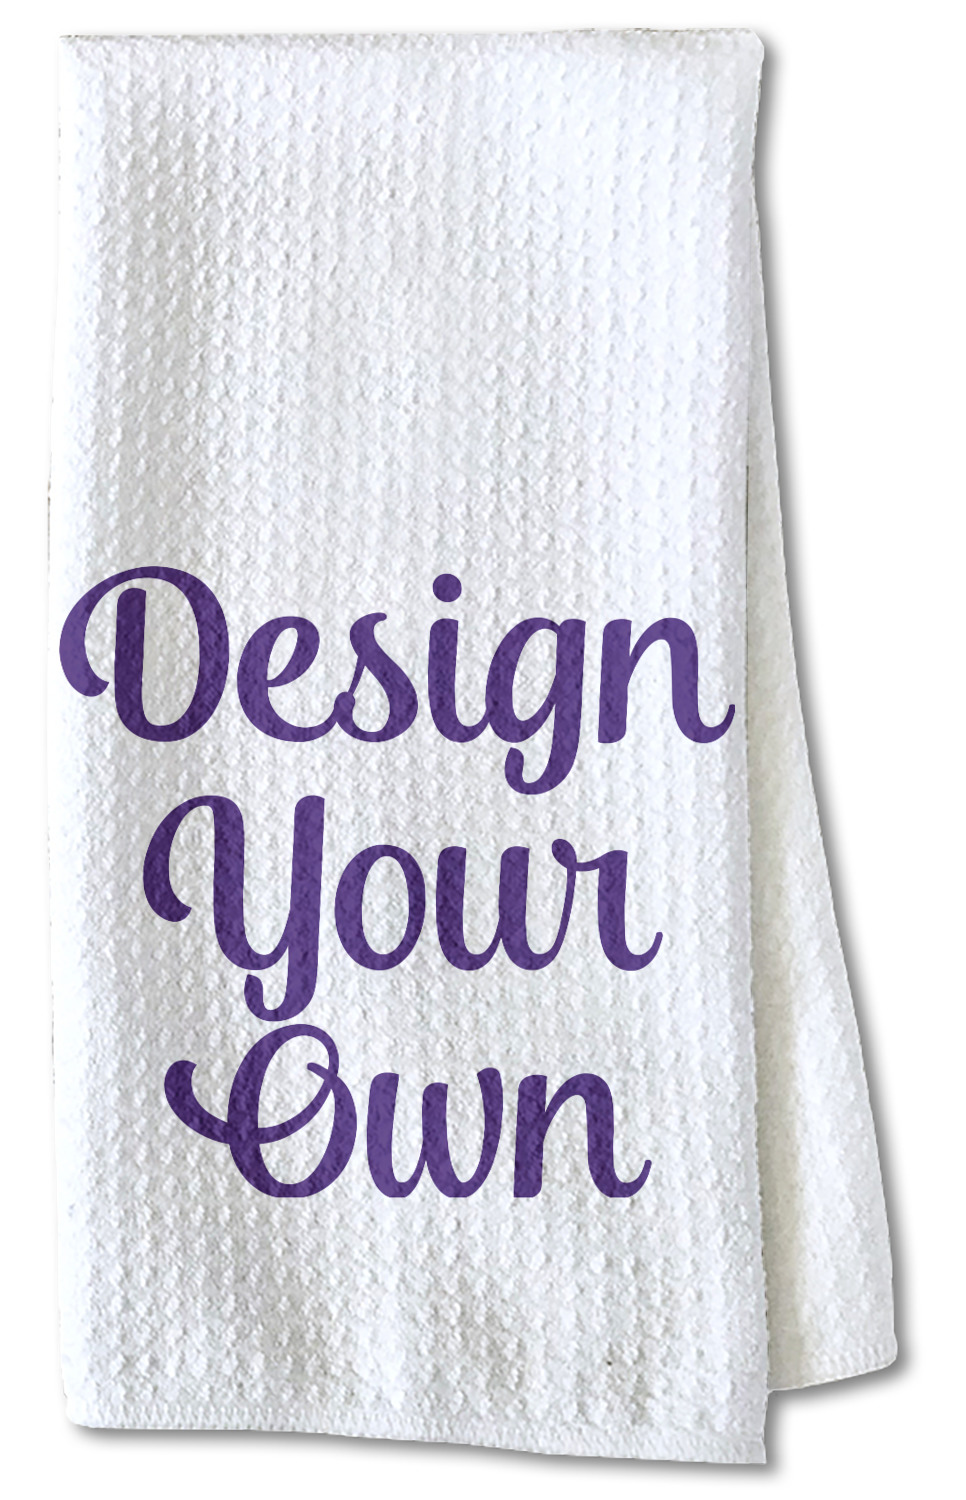 https://www.youcustomizeit.com/common/MAKE/965833/Design-Your-Own-Waffle-Towel-Partial-Print-MAIN-new-imf.jpg?lm=1697656817